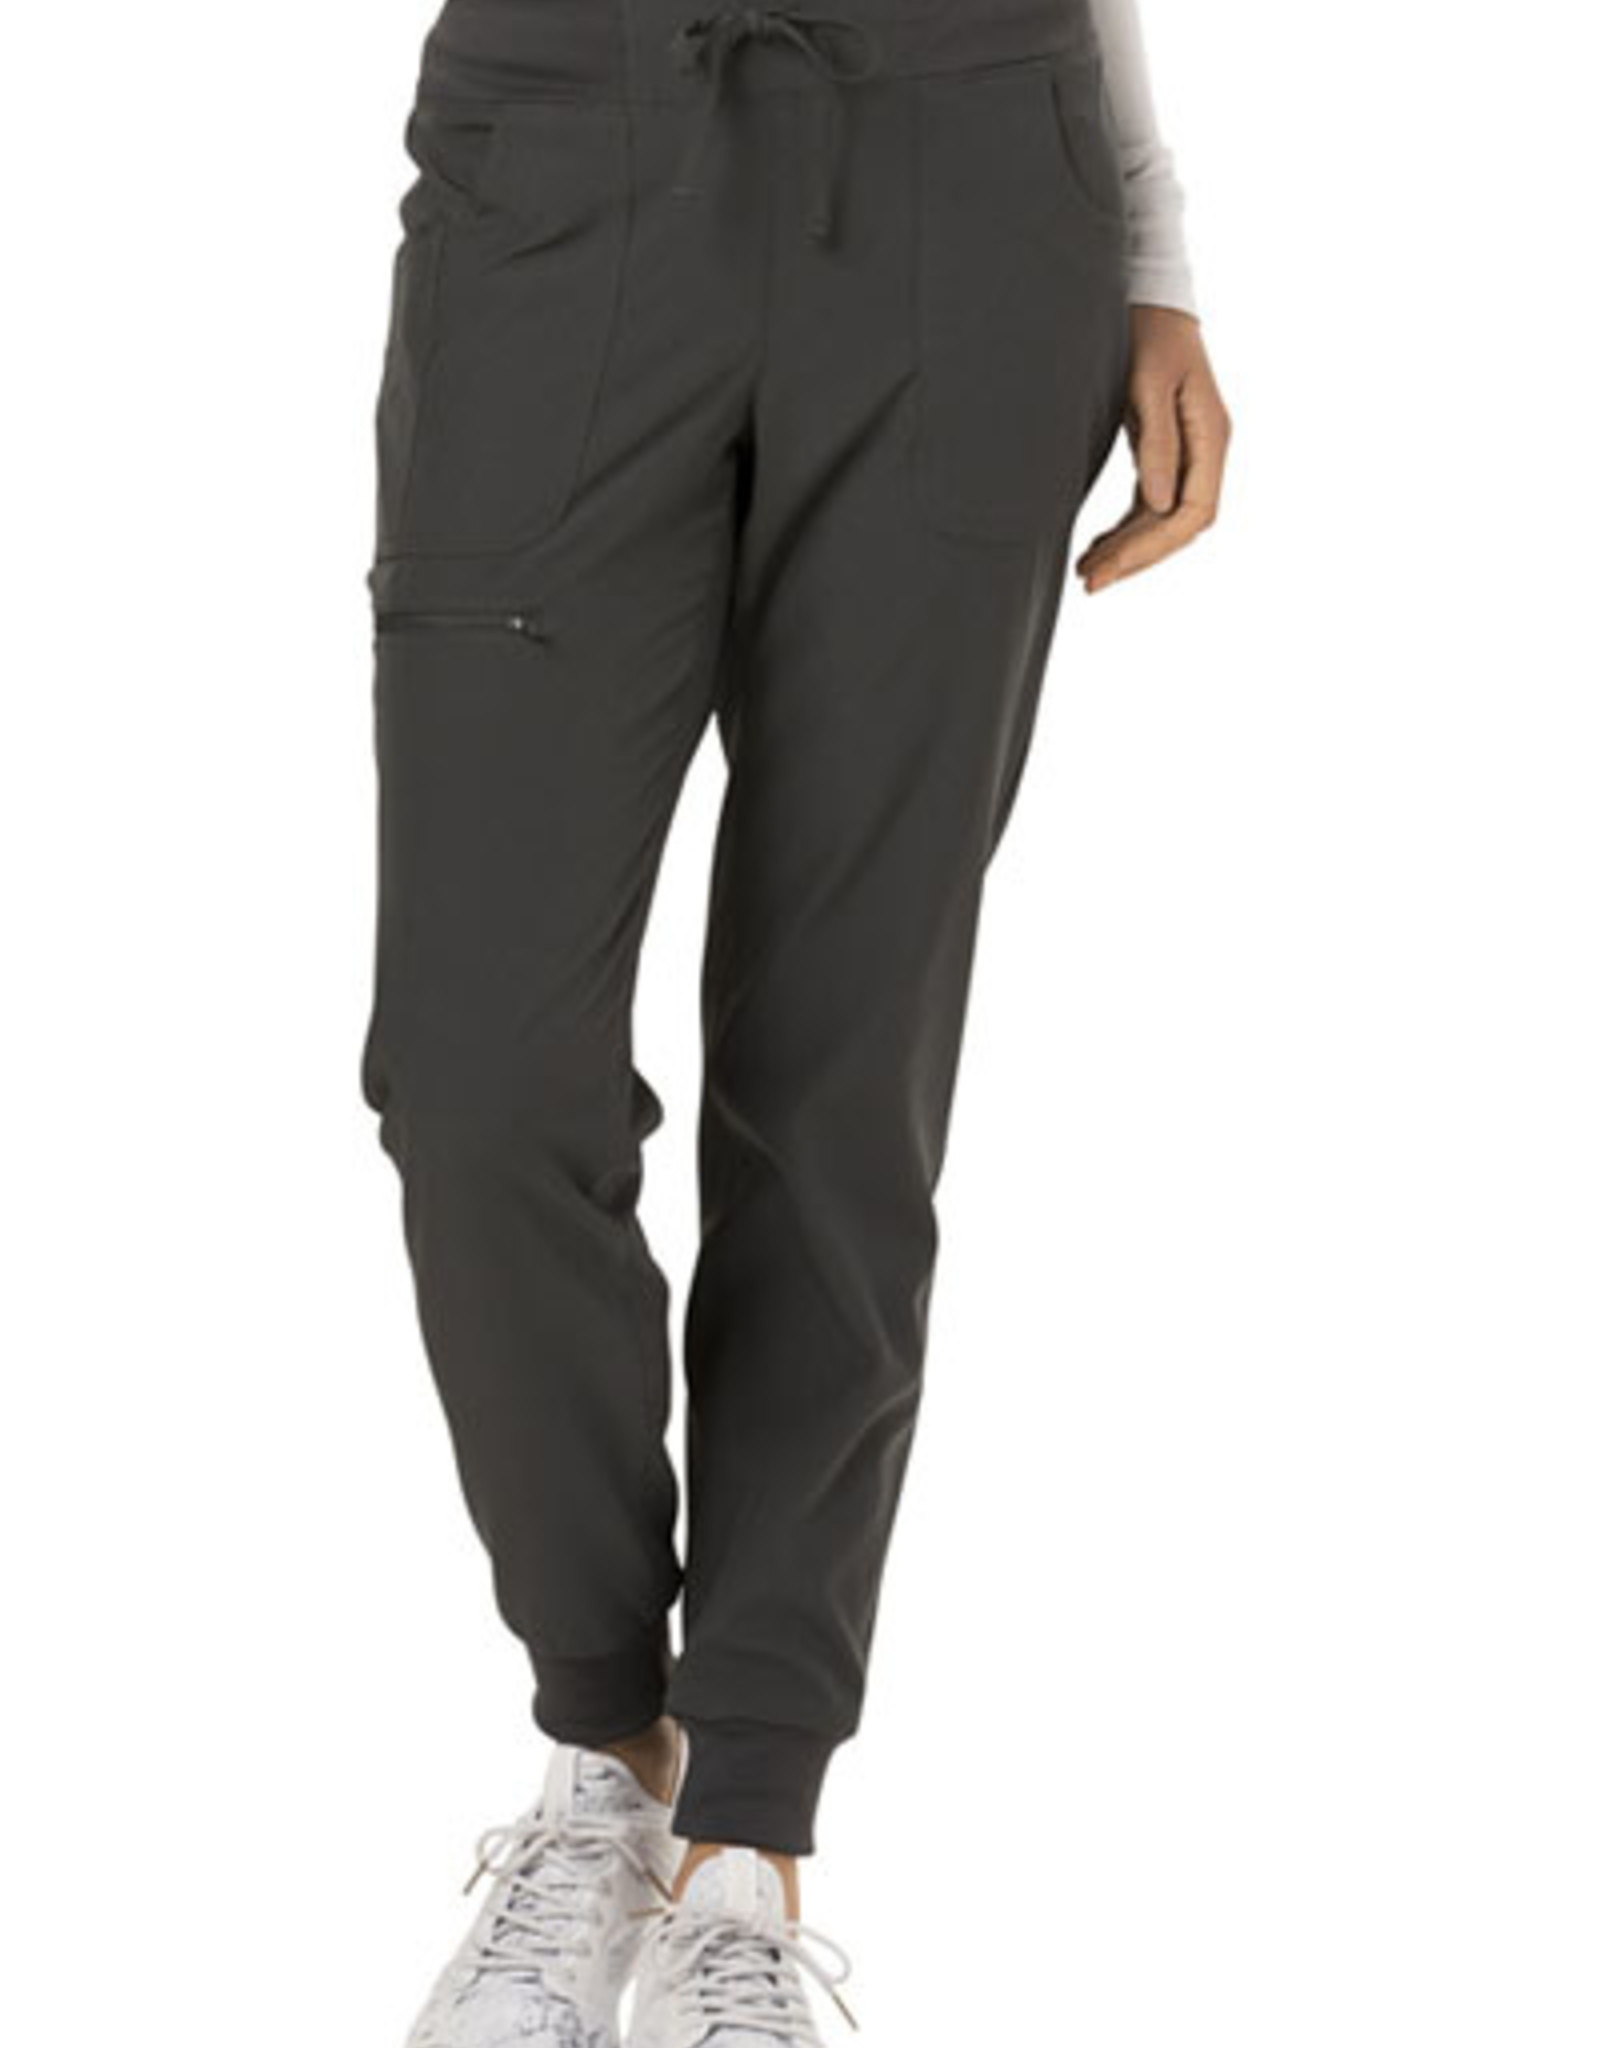 Petite Joggers, Womens Jogging Bottoms in Petite Sizes